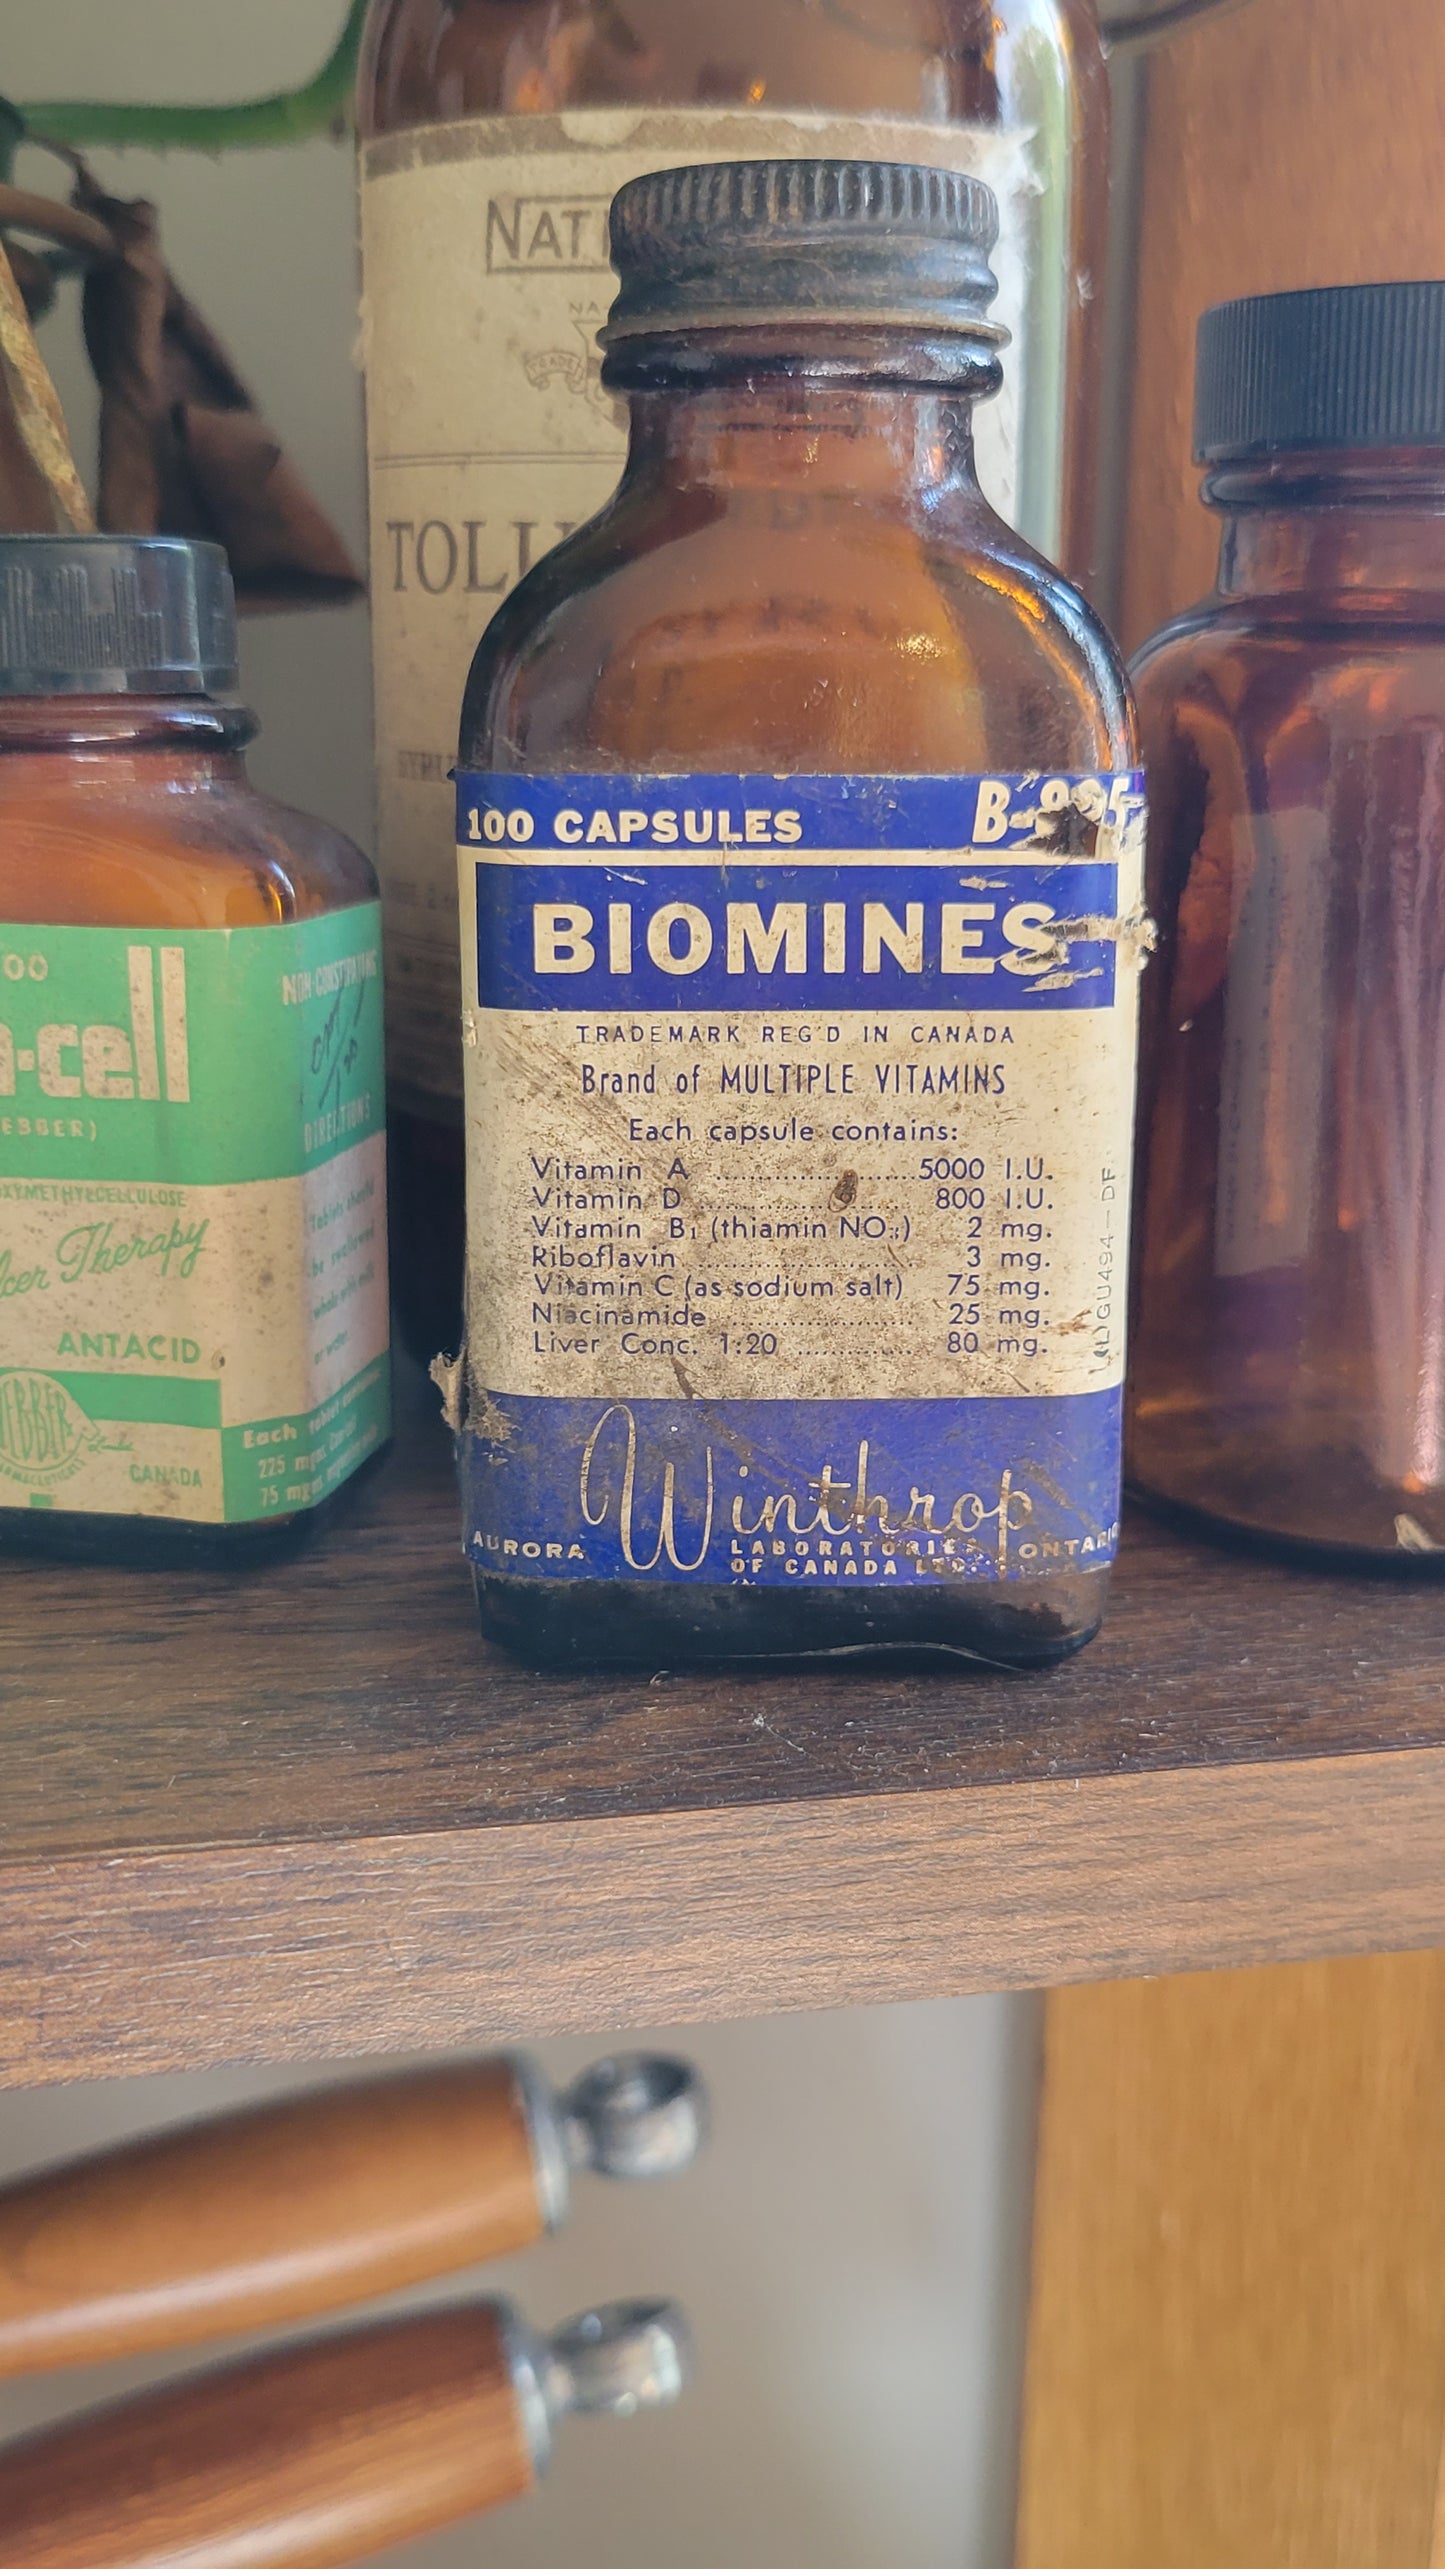 4pc Collection of Vintage Pharmacy Bottled